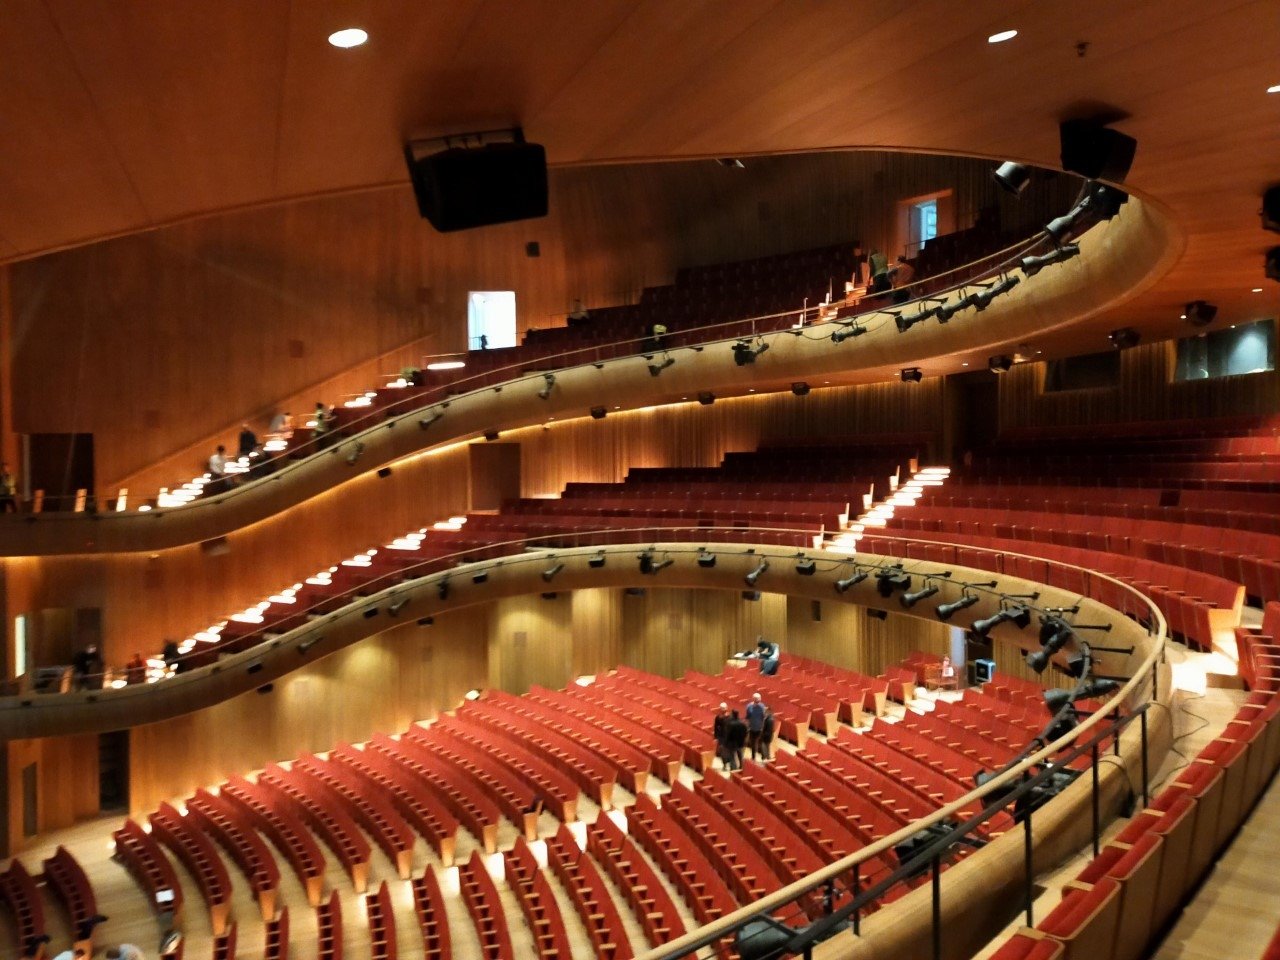 A view of the auditorium of the opera house, Istanbul, Turkey, Oct. 28, 2021. (DHA PHOTO)